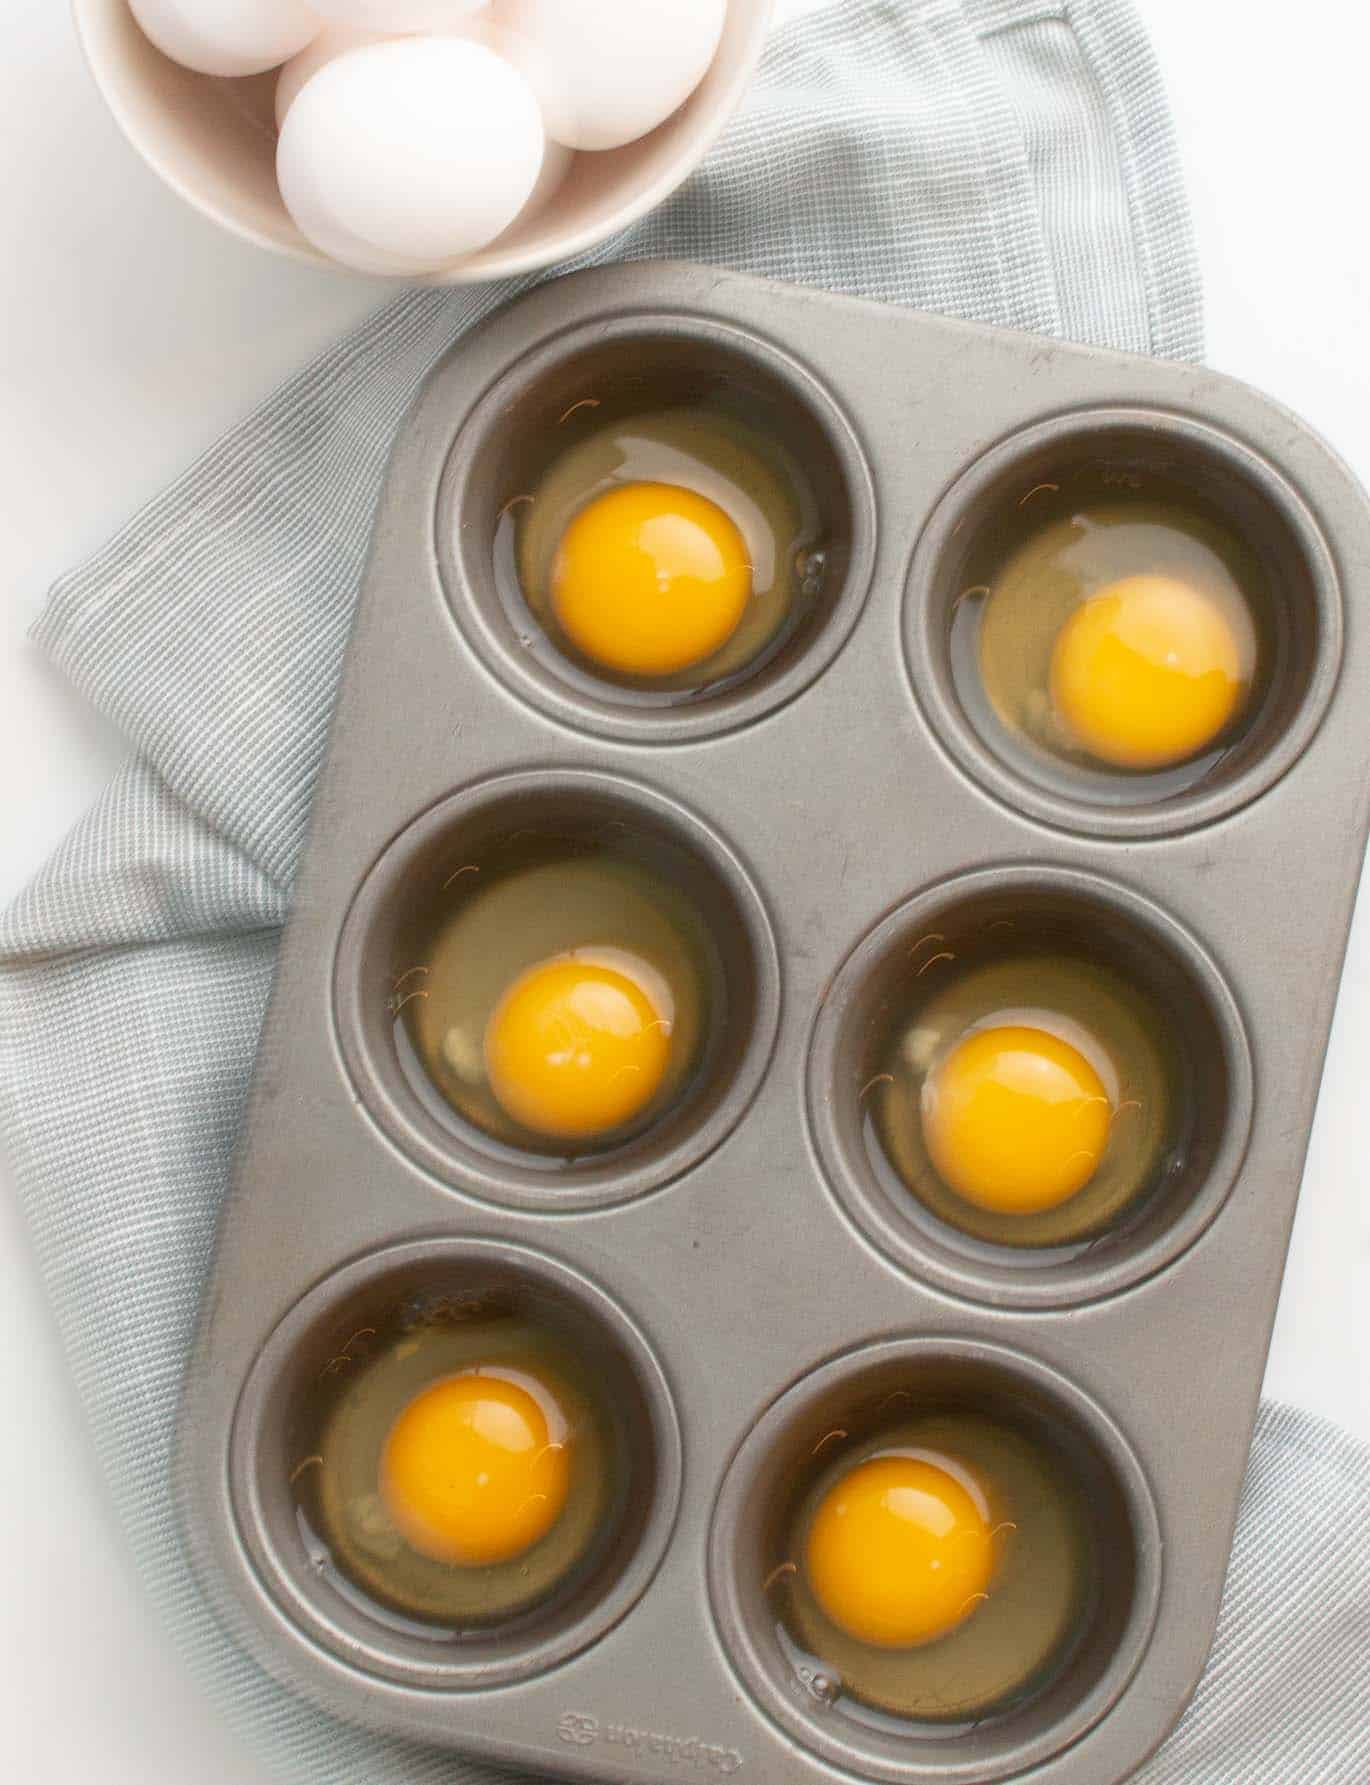 A cream bowl of whole white eggs with a muffin tin with a single broken egg in each hole on top of a light gray towel.